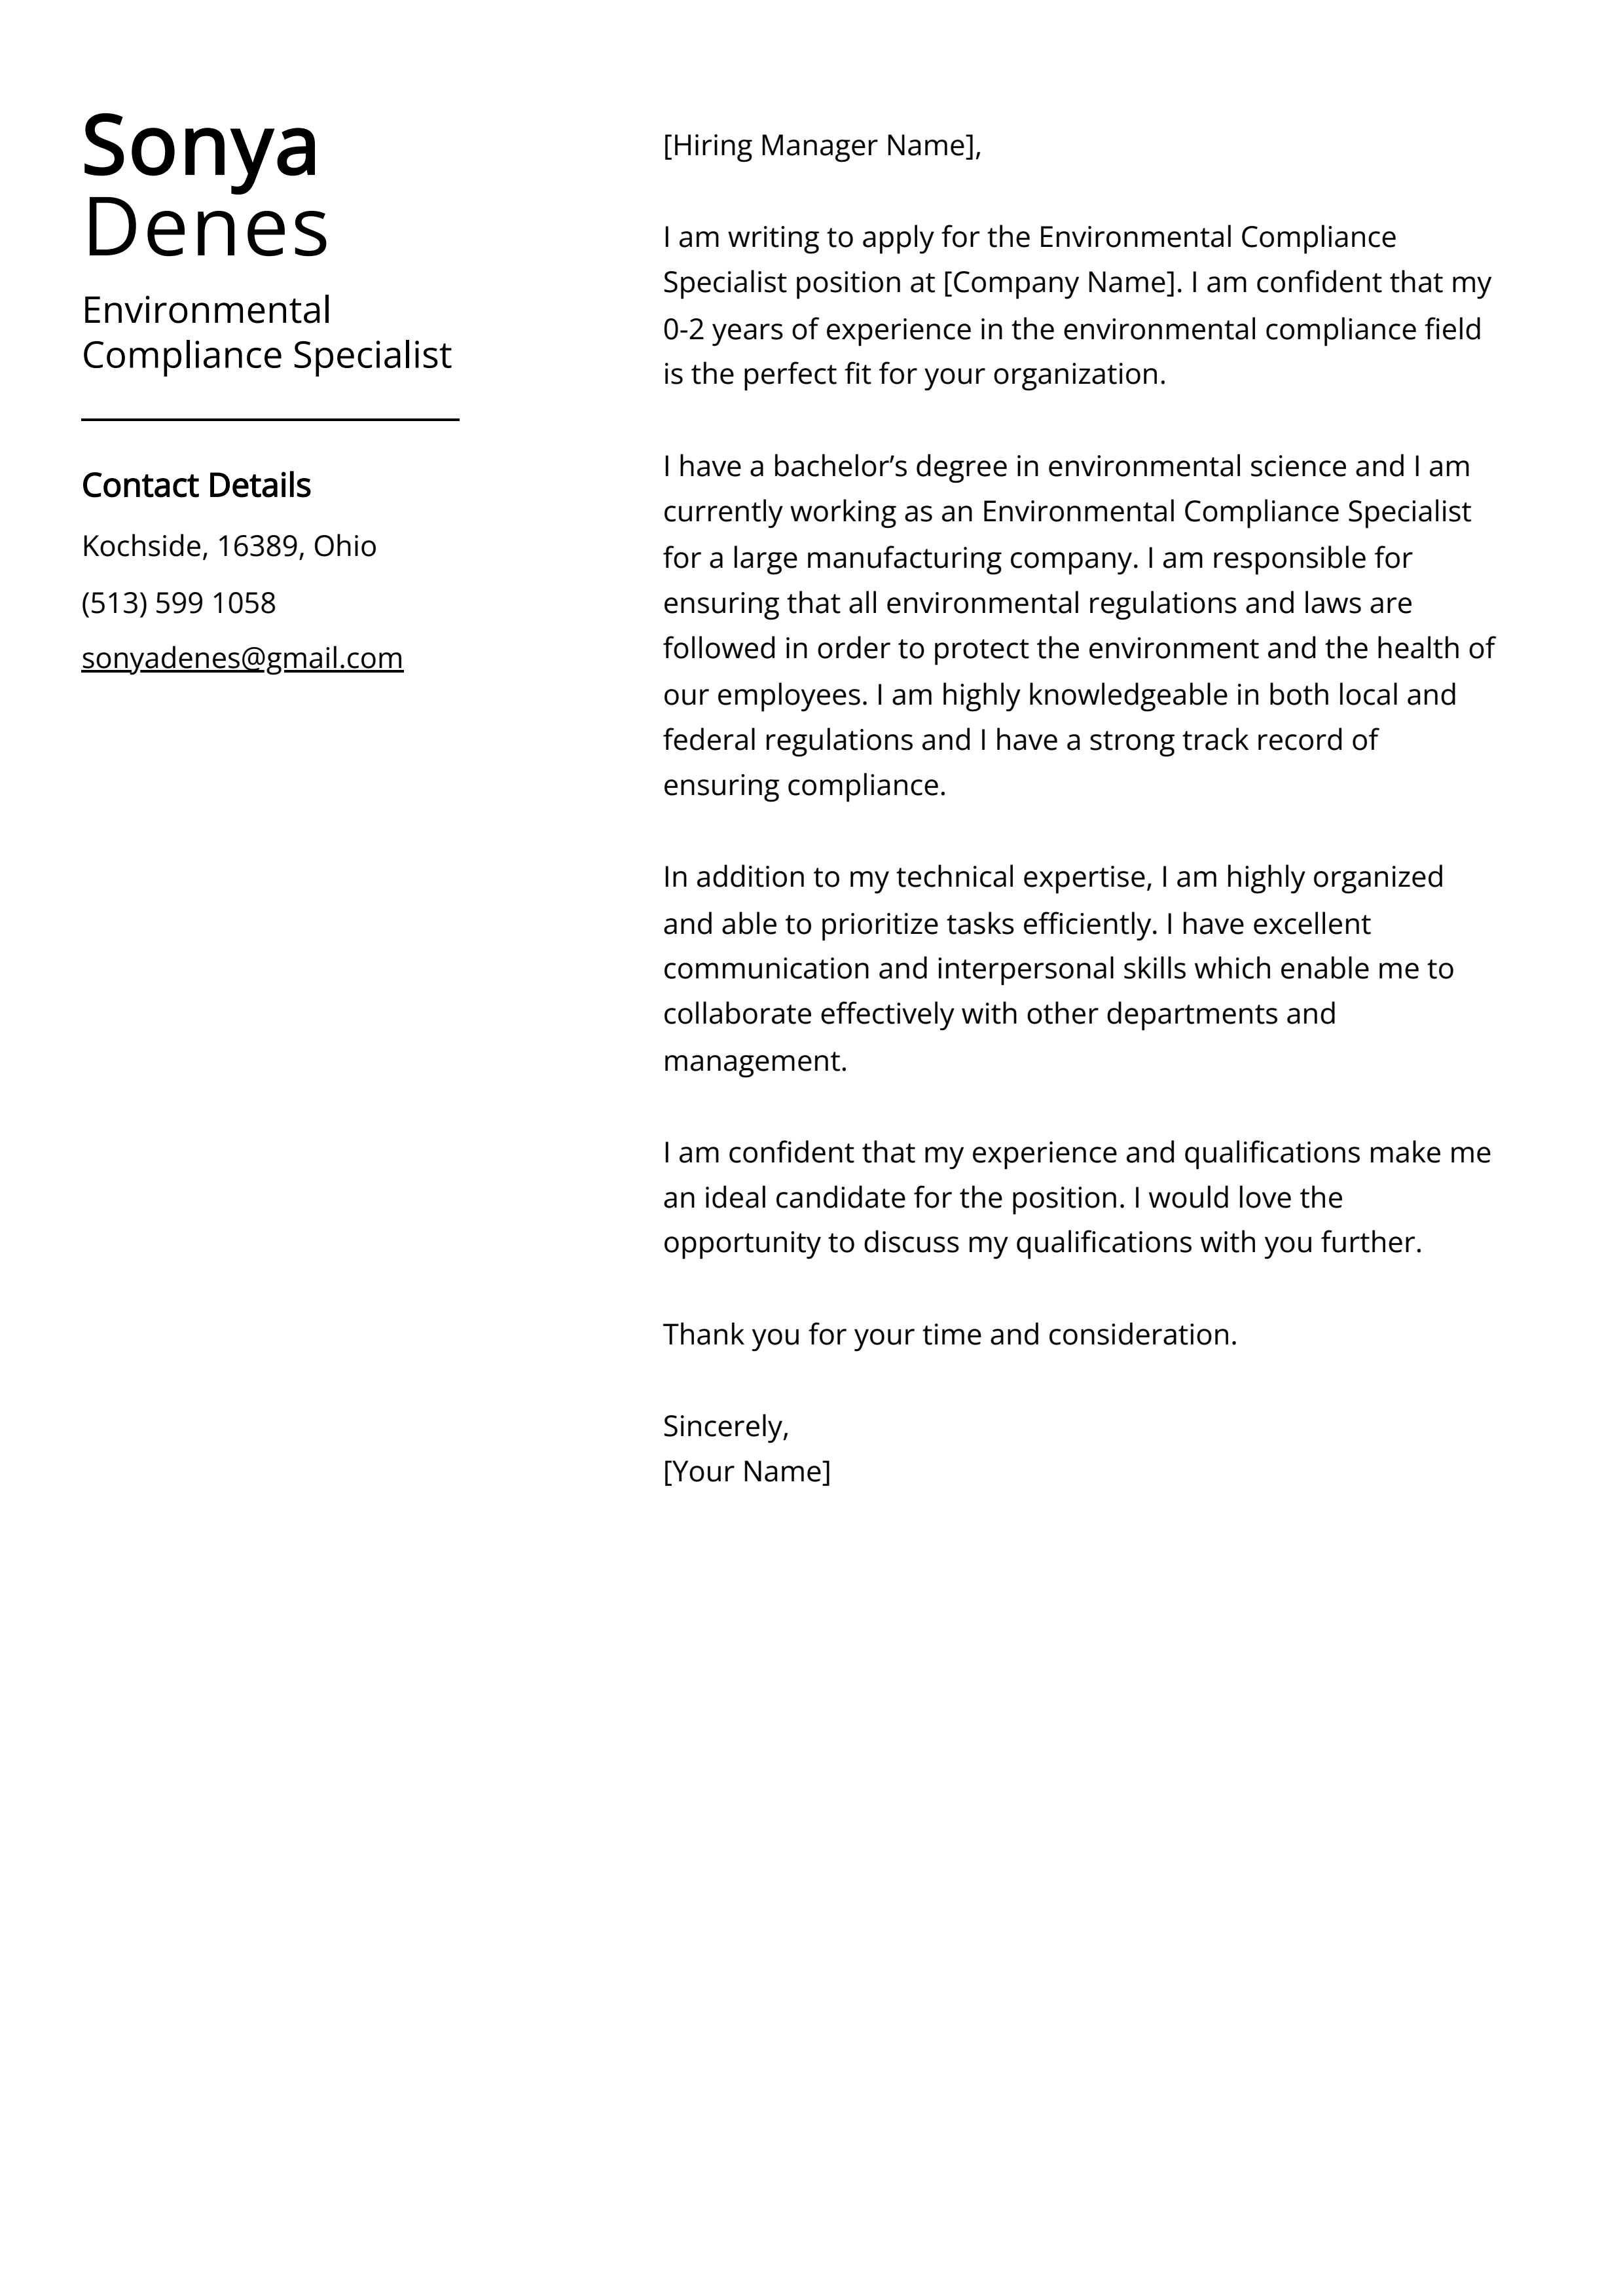 Environmental Compliance Specialist Cover Letter Example